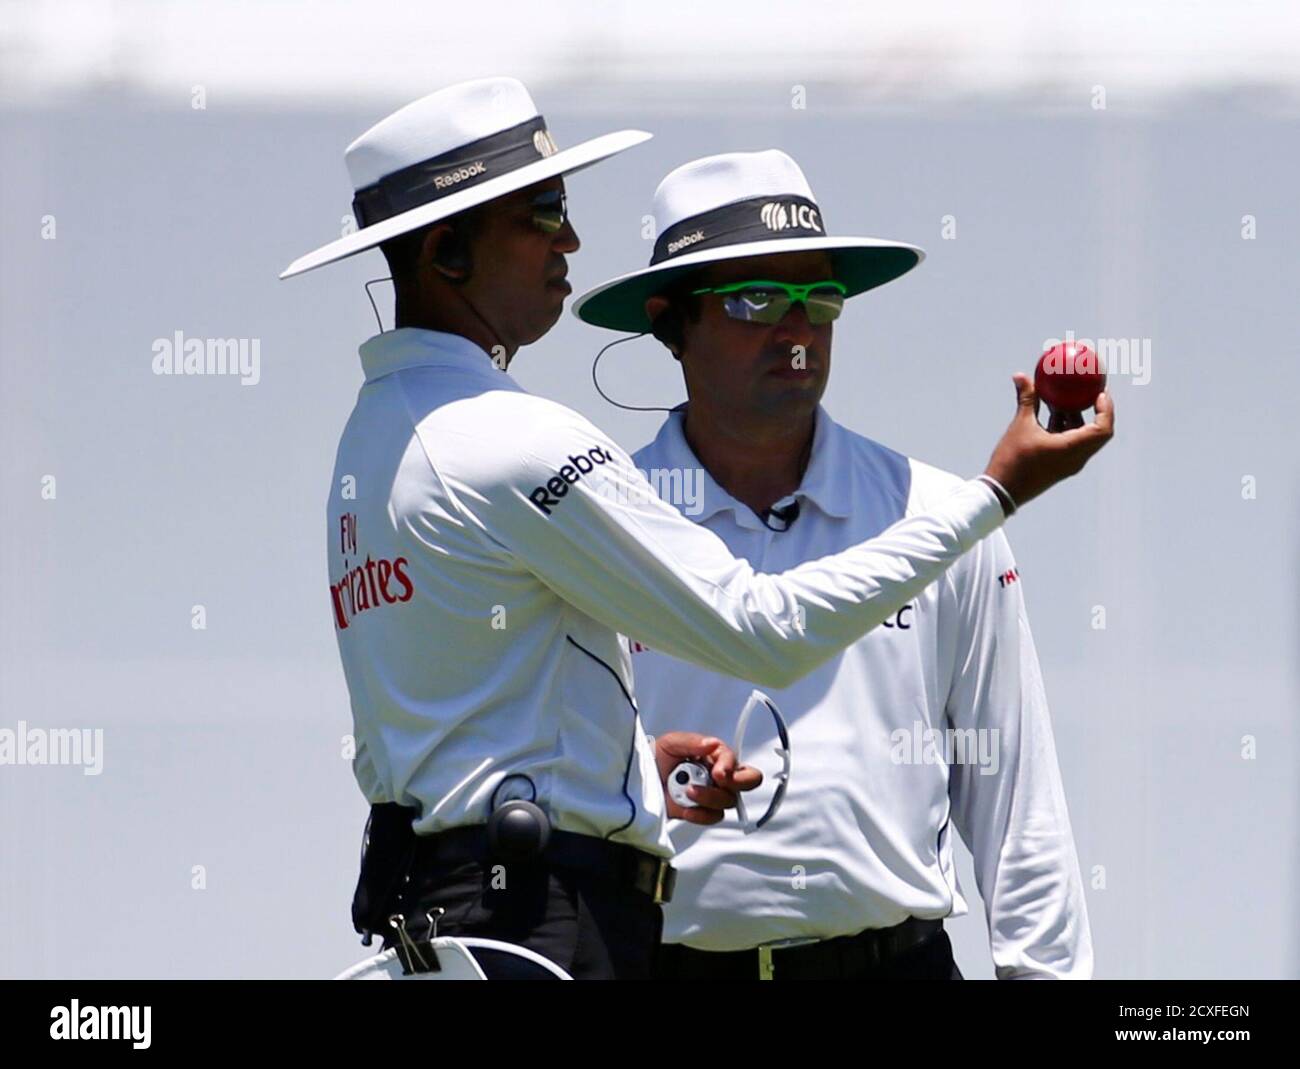 Umpires Kumar Dharmasena (L) of Sri Lanka and Aleem Dar of Pakistan inspect the ball before changing it during the first day's play of the first Ashes test cricket match between Australia and England in Brisbane November 21, 2013. REUTERS/David Gray (AUSTRALIA - Tags: SPORT CRICKET) Stock Photo